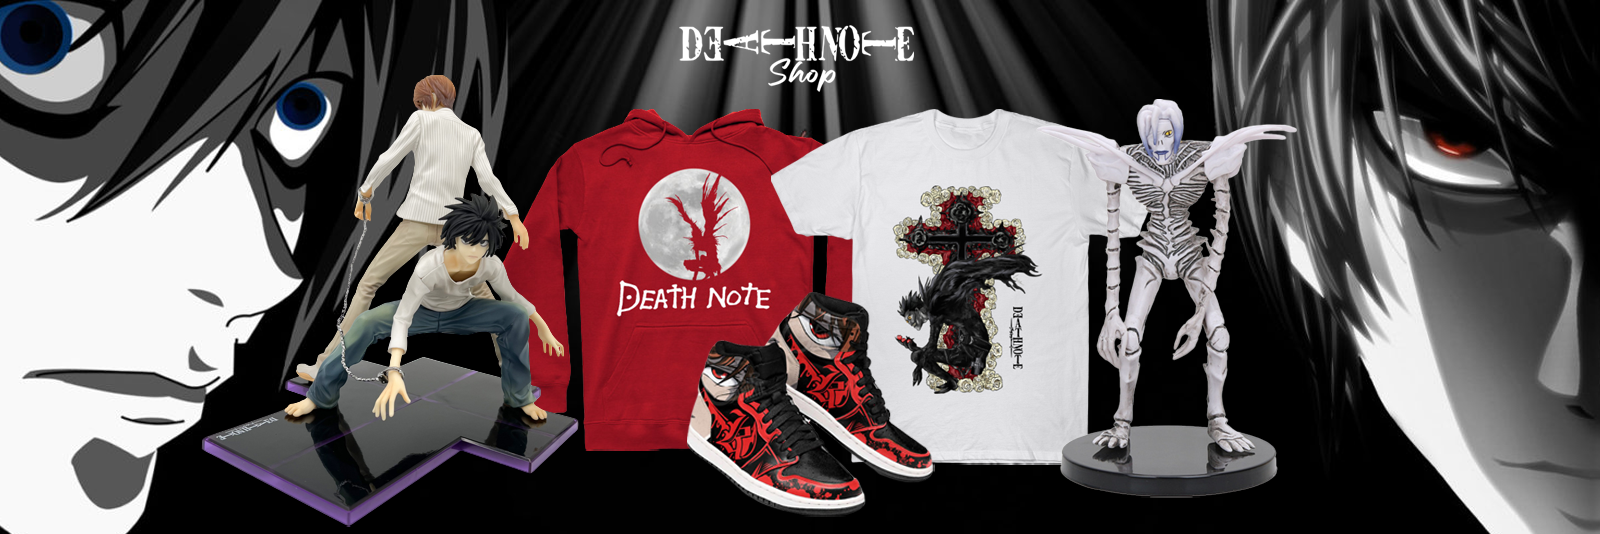 Death Note Shop Banner